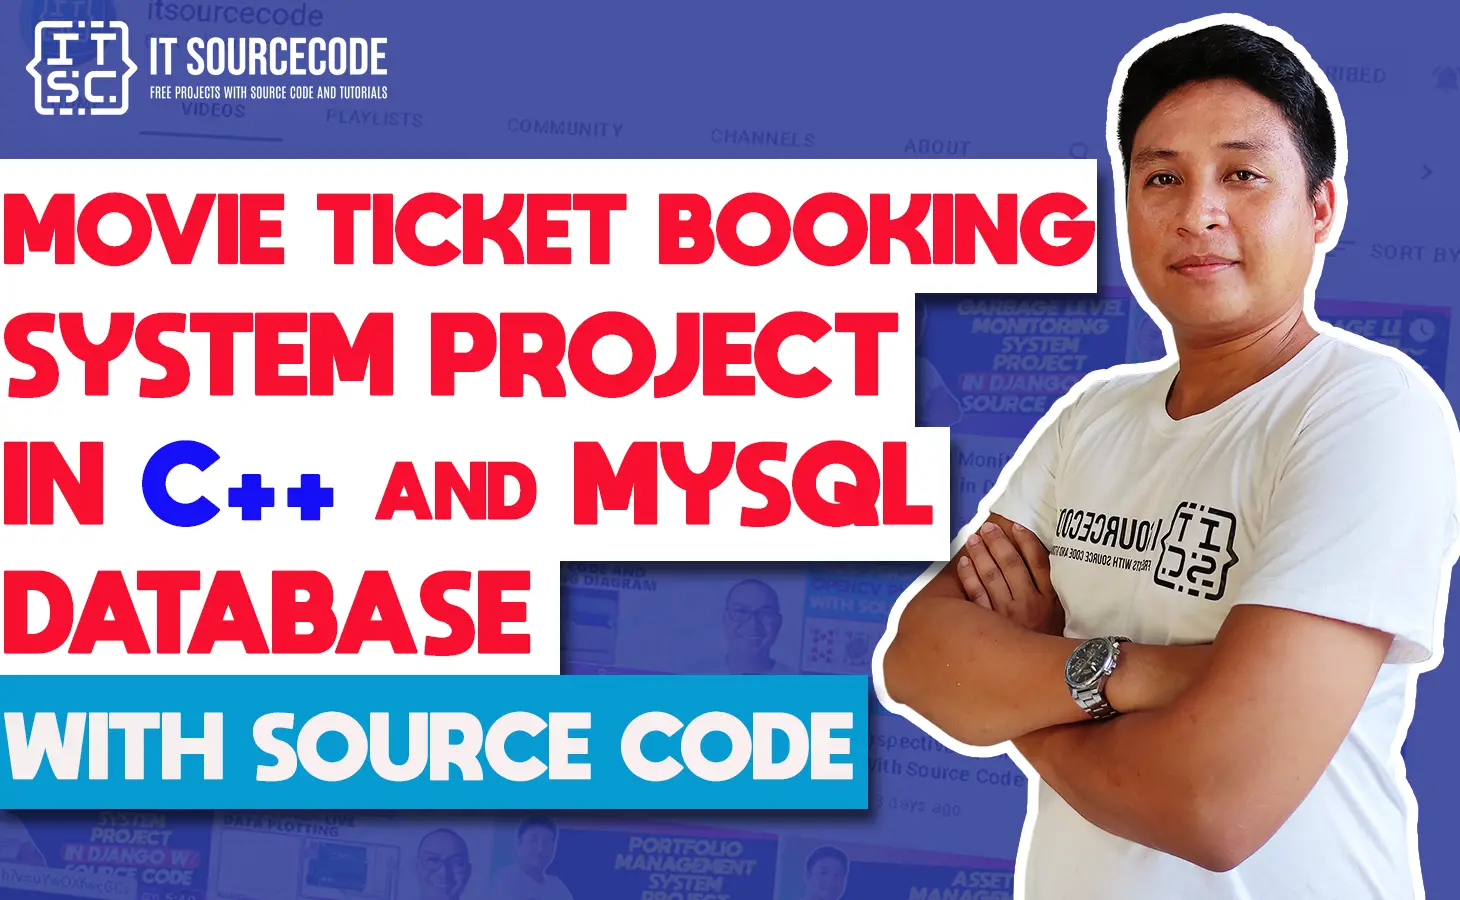 Movie Ticket Booking System Project in C++ and MySQL Database